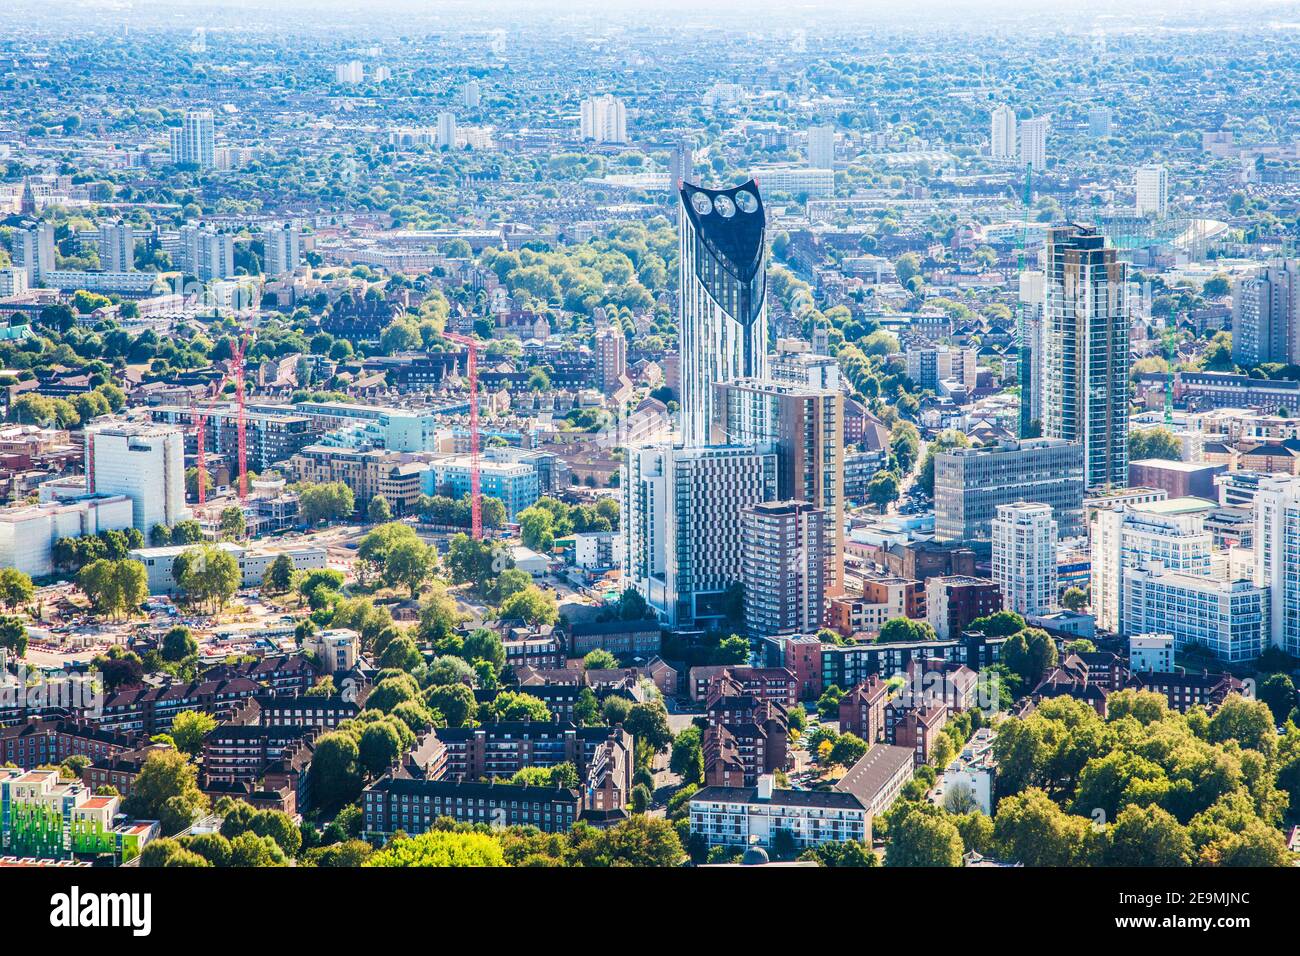 The view from the Shard over London and the Borough of Southwark, with the Strata SE1 nicknamed  'The Razor' in the centre. Stock Photo